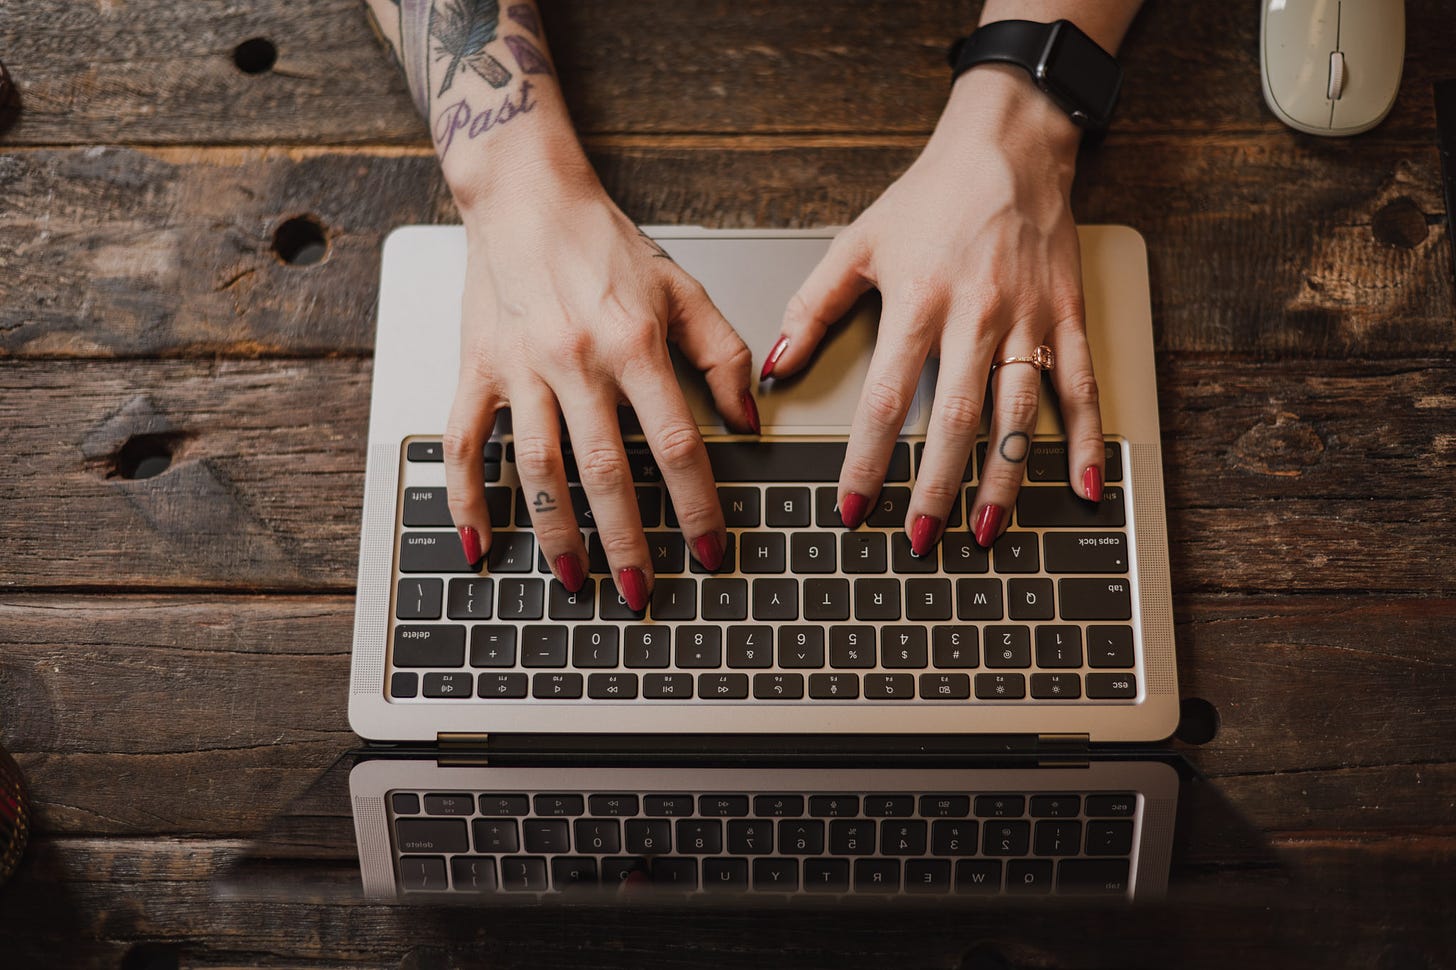 Kate’s tattooed hands typing on her laptop, by Amanda Macchia.